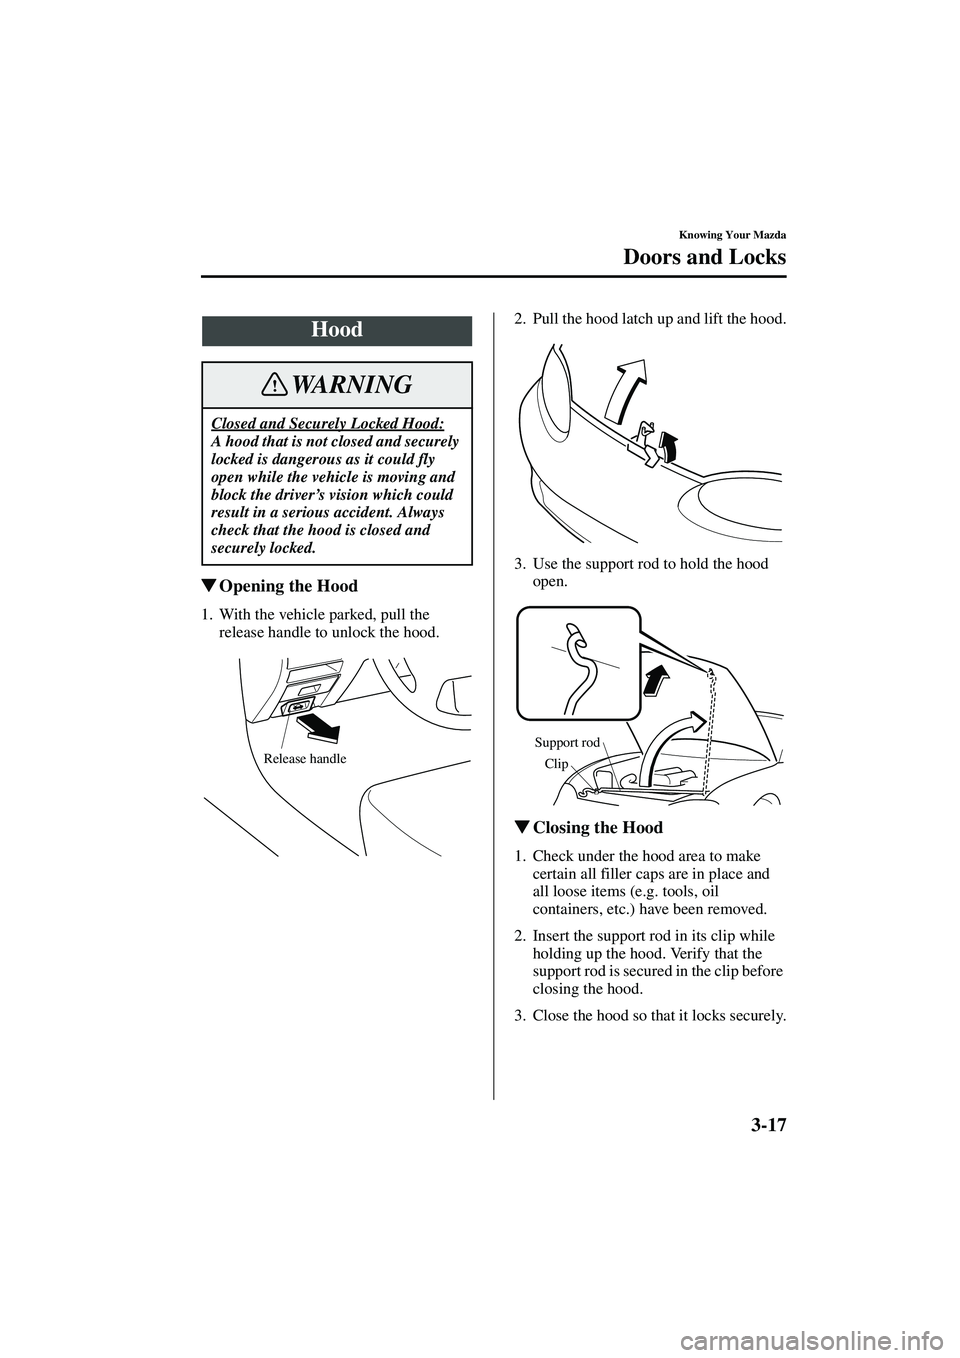 MAZDA MODEL MX-5 MIATA 2004  Owners Manual 3-17
Knowing Your Mazda
Doors and Locks
Form No. 8S15-EA-03G
Opening the Hood
1. With the vehicle parked, pull the 
release handle to unlock the hood. 2. Pull the hood latch up and lift the hood.
3. 